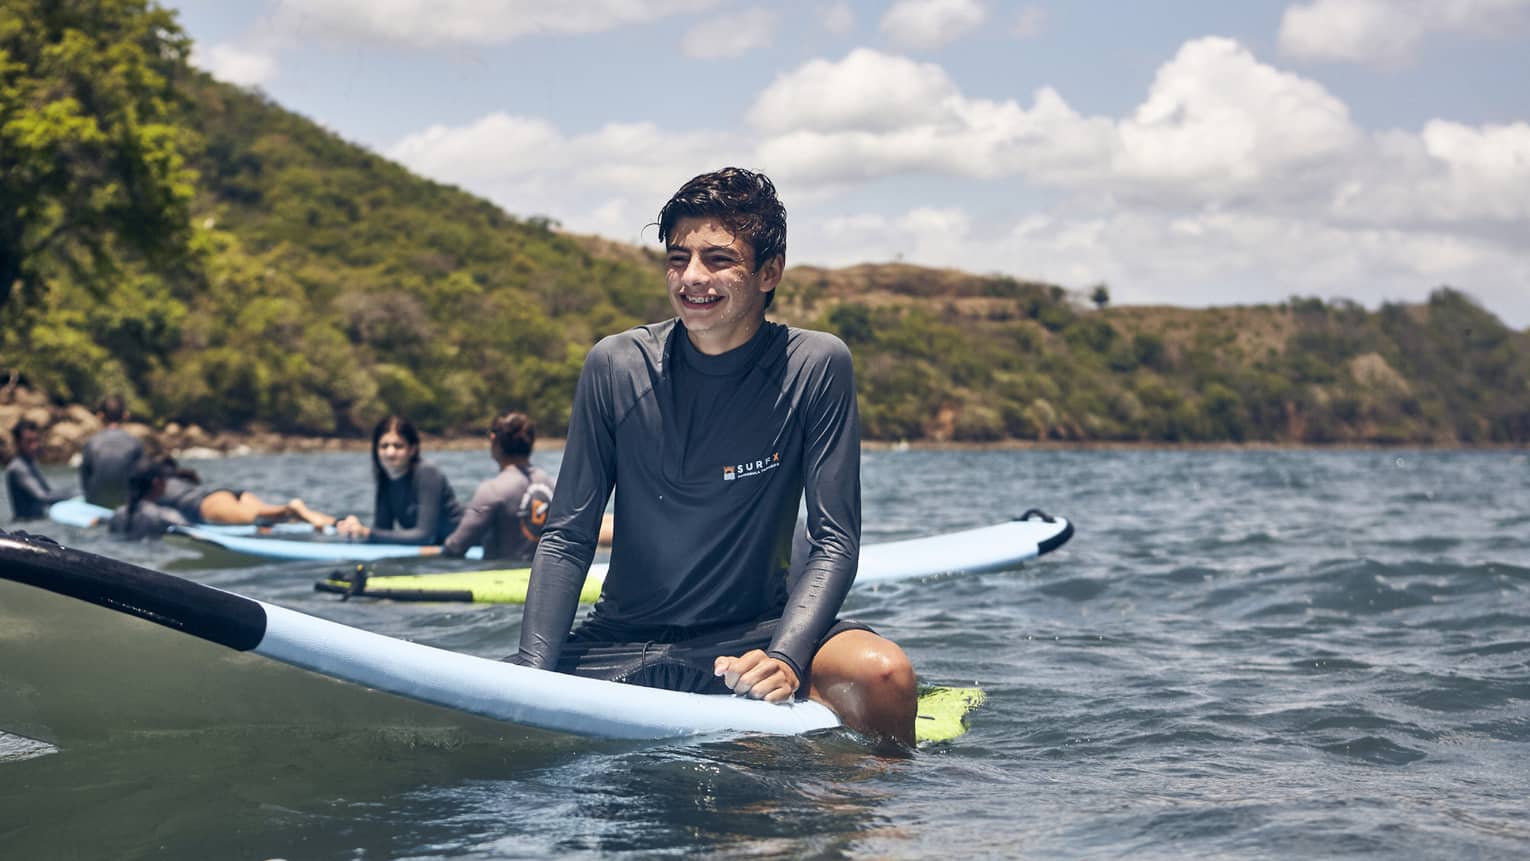 Young man with short, dark hair and wearing a dark grey long-sleeve rashguard sits on a light-blue surfboard in calm ocean waters with three other surfers sitting behind him on their boards